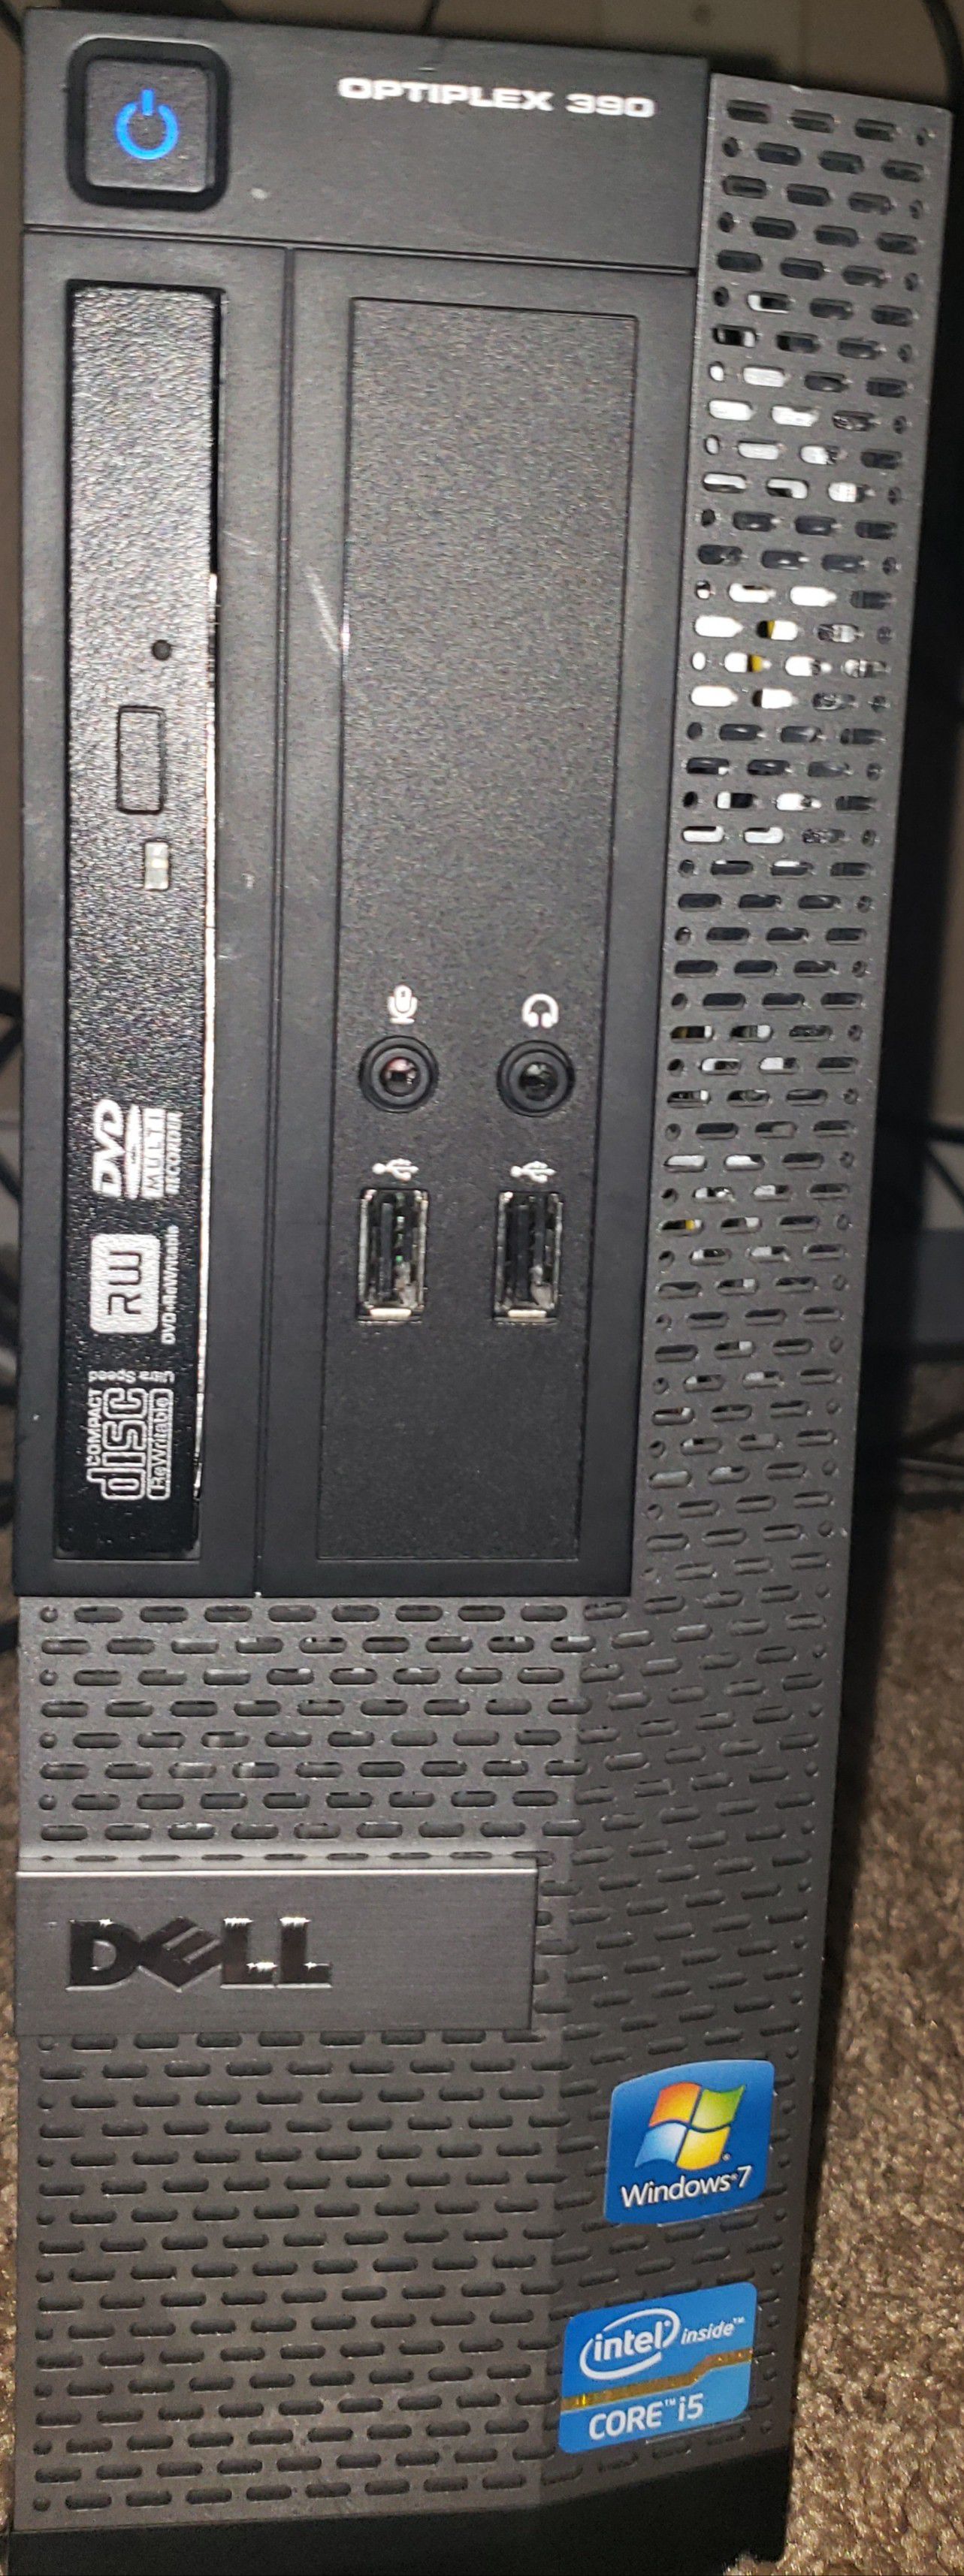 Dell optiplex 390 desktop with graphics card for multiple displays